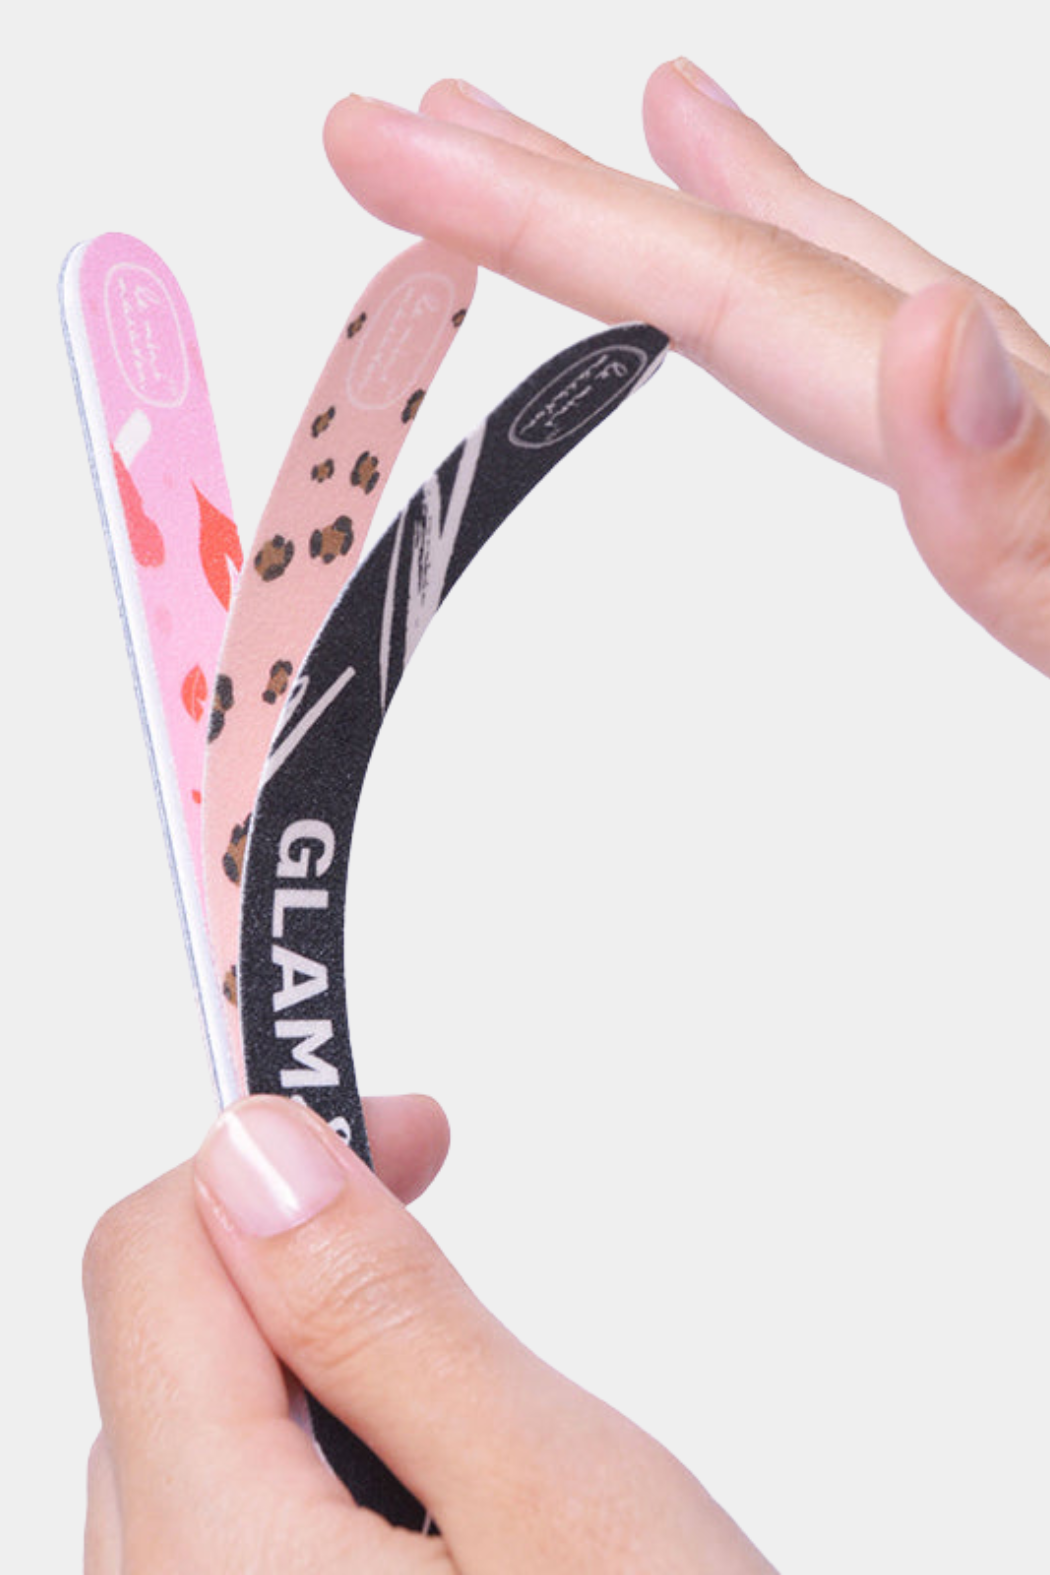 Nail file "glam&go", 6-in-1 peel off